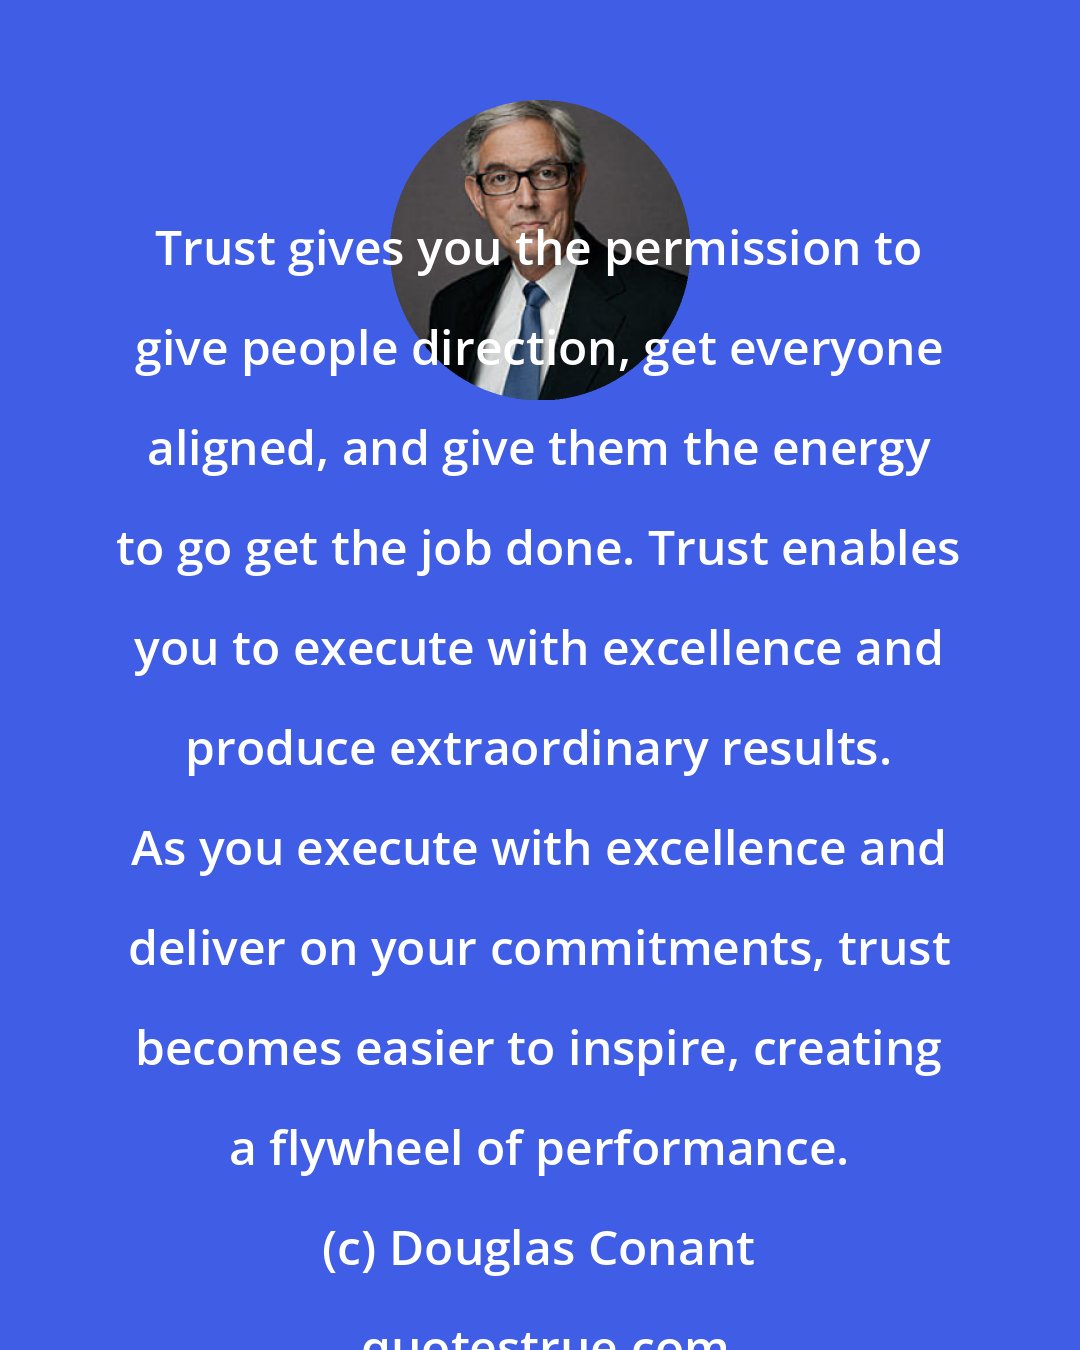 Douglas Conant: Trust gives you the permission to give people direction, get everyone aligned, and give them the energy to go get the job done. Trust enables you to execute with excellence and produce extraordinary results. As you execute with excellence and deliver on your commitments, trust becomes easier to inspire, creating a flywheel of performance.